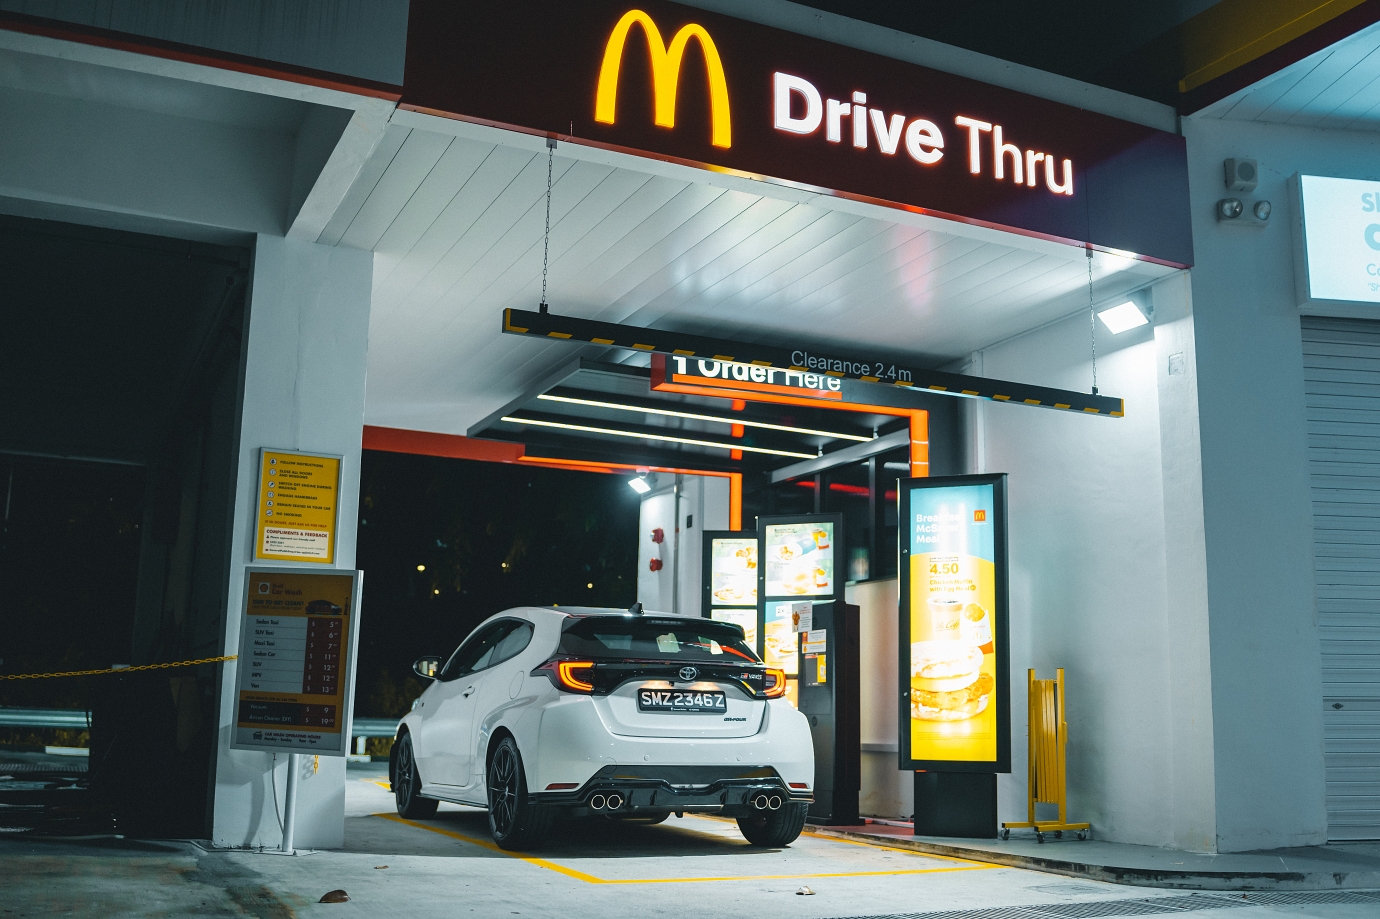 GR Yaris puts a new spin on the concept of Fast Food...!